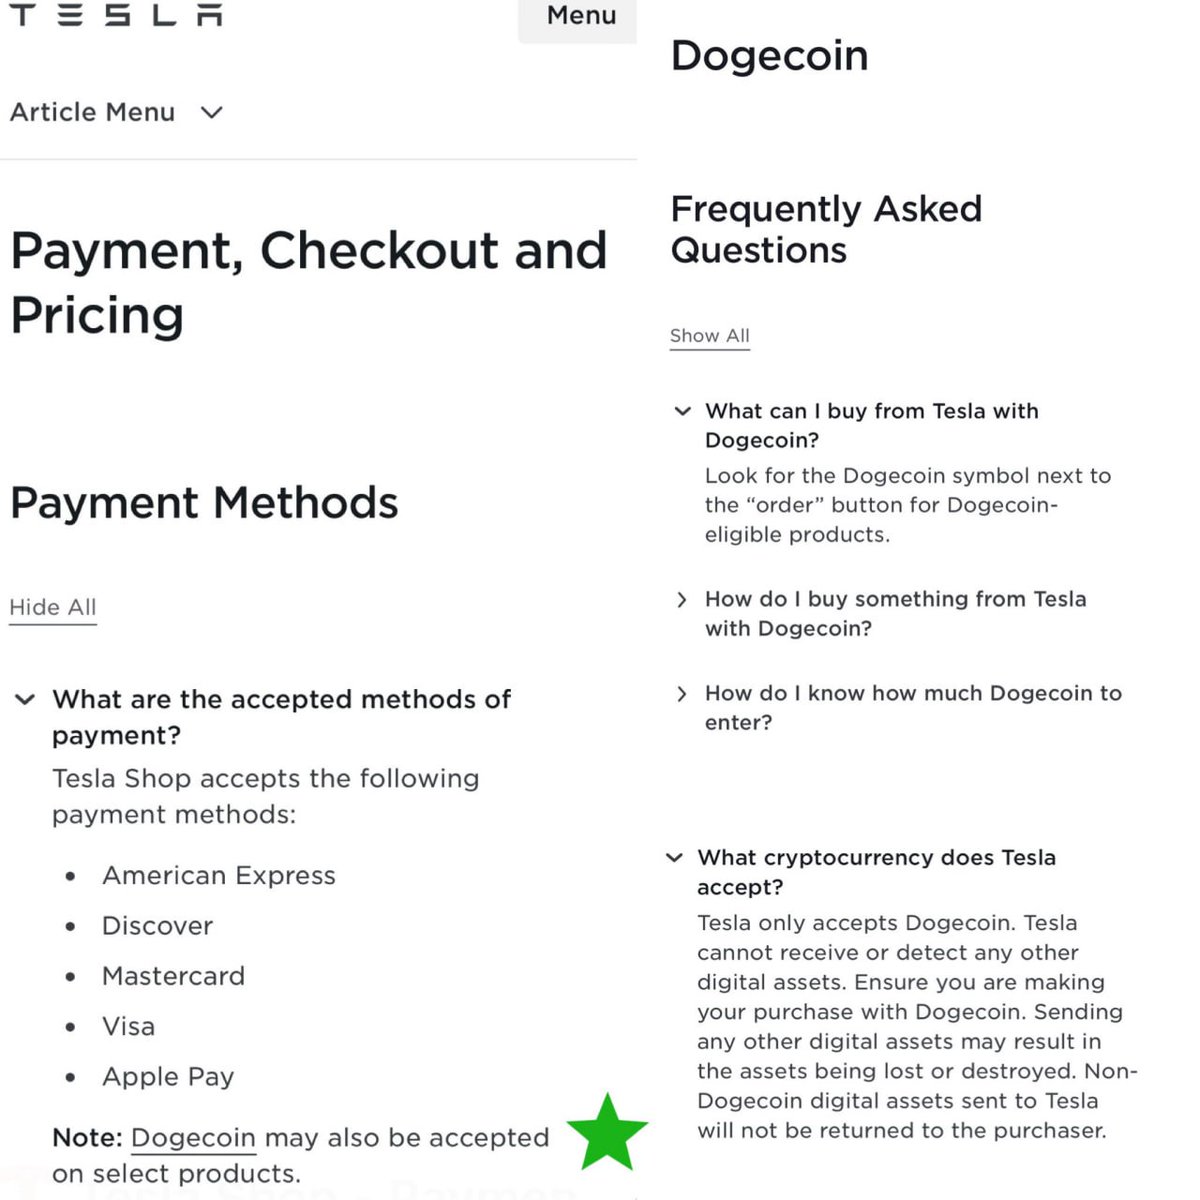 Hullo 👋 Tesla is updating the payment methods on its website to include DOGE. 🚗 Dogecoin is the only crypto accepted and only for a few eligible products.